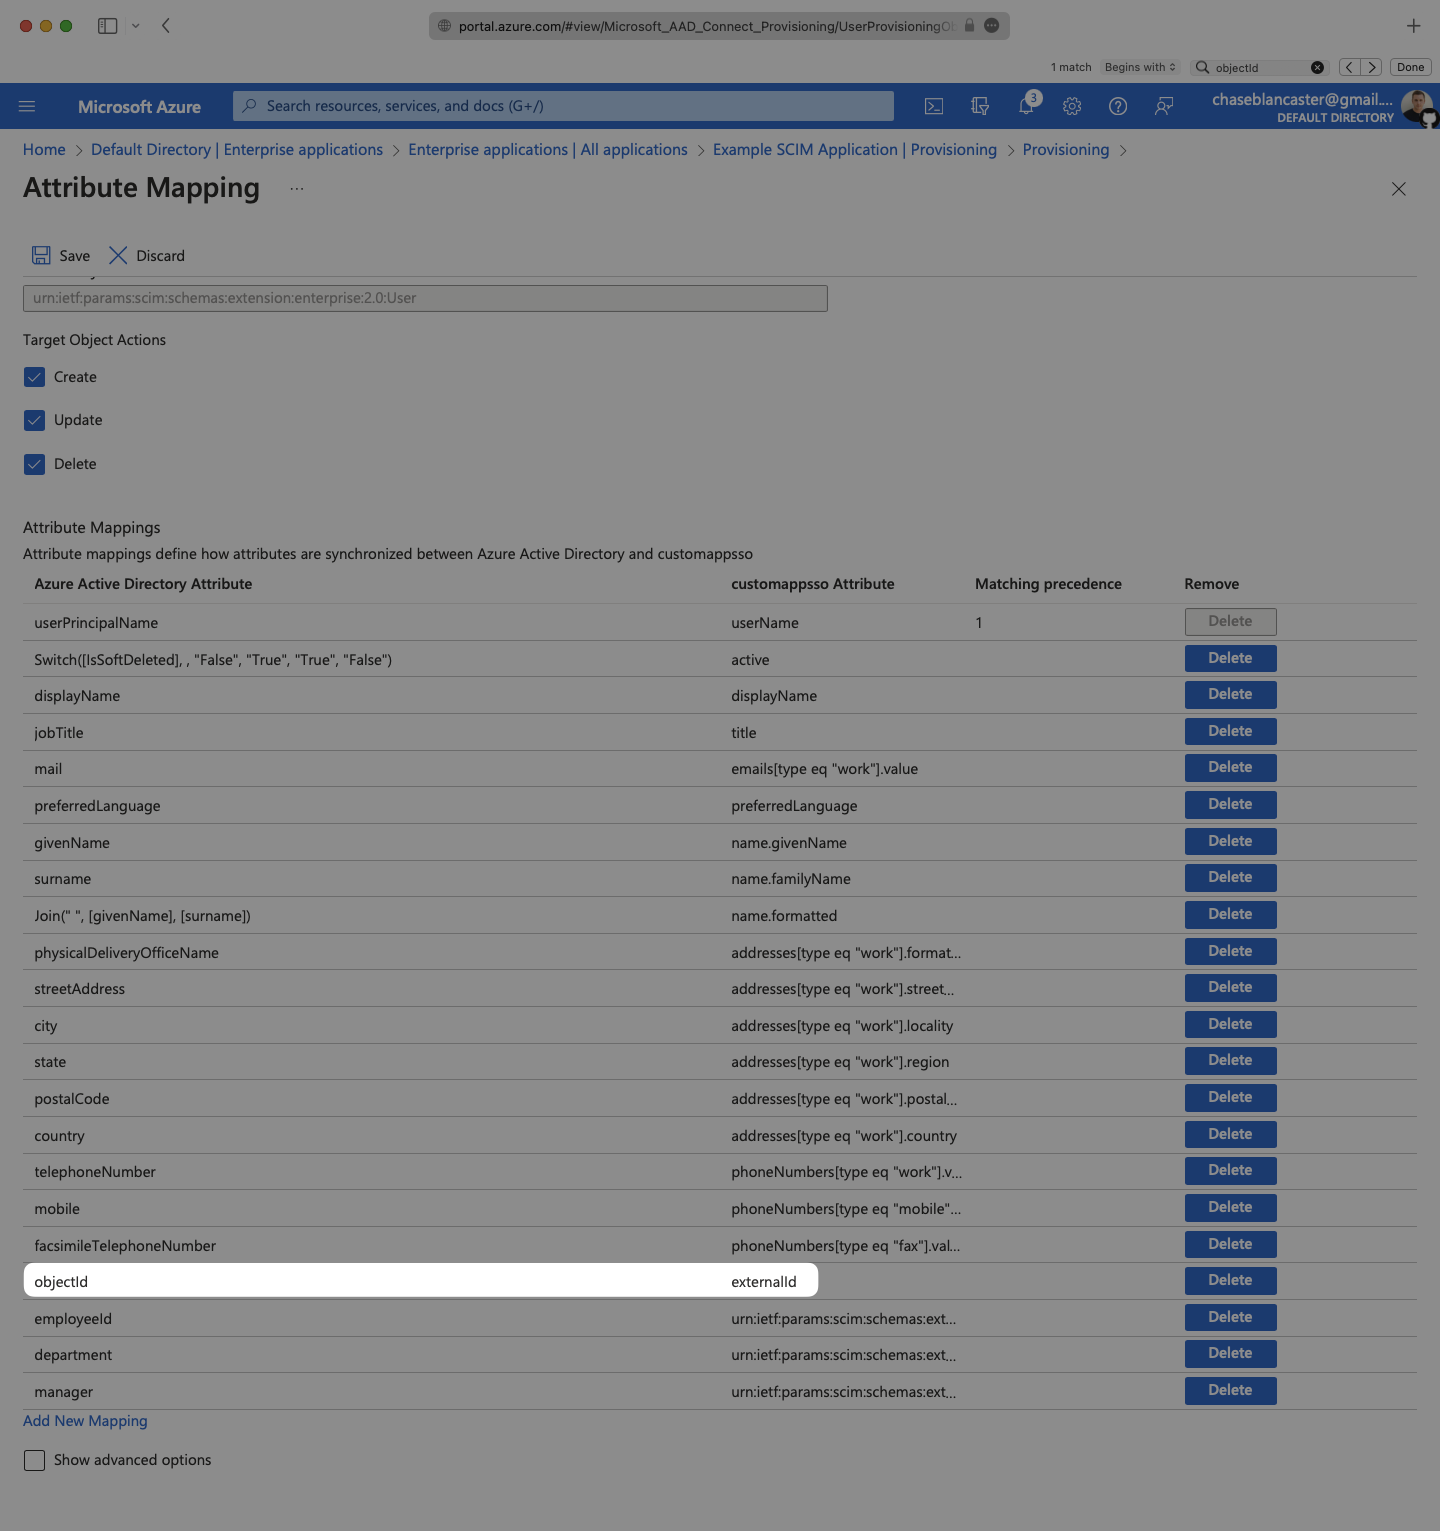 A screenshot showing where to ensure object ID is mapped to external ID in the Attribute Mapping section in Azure.